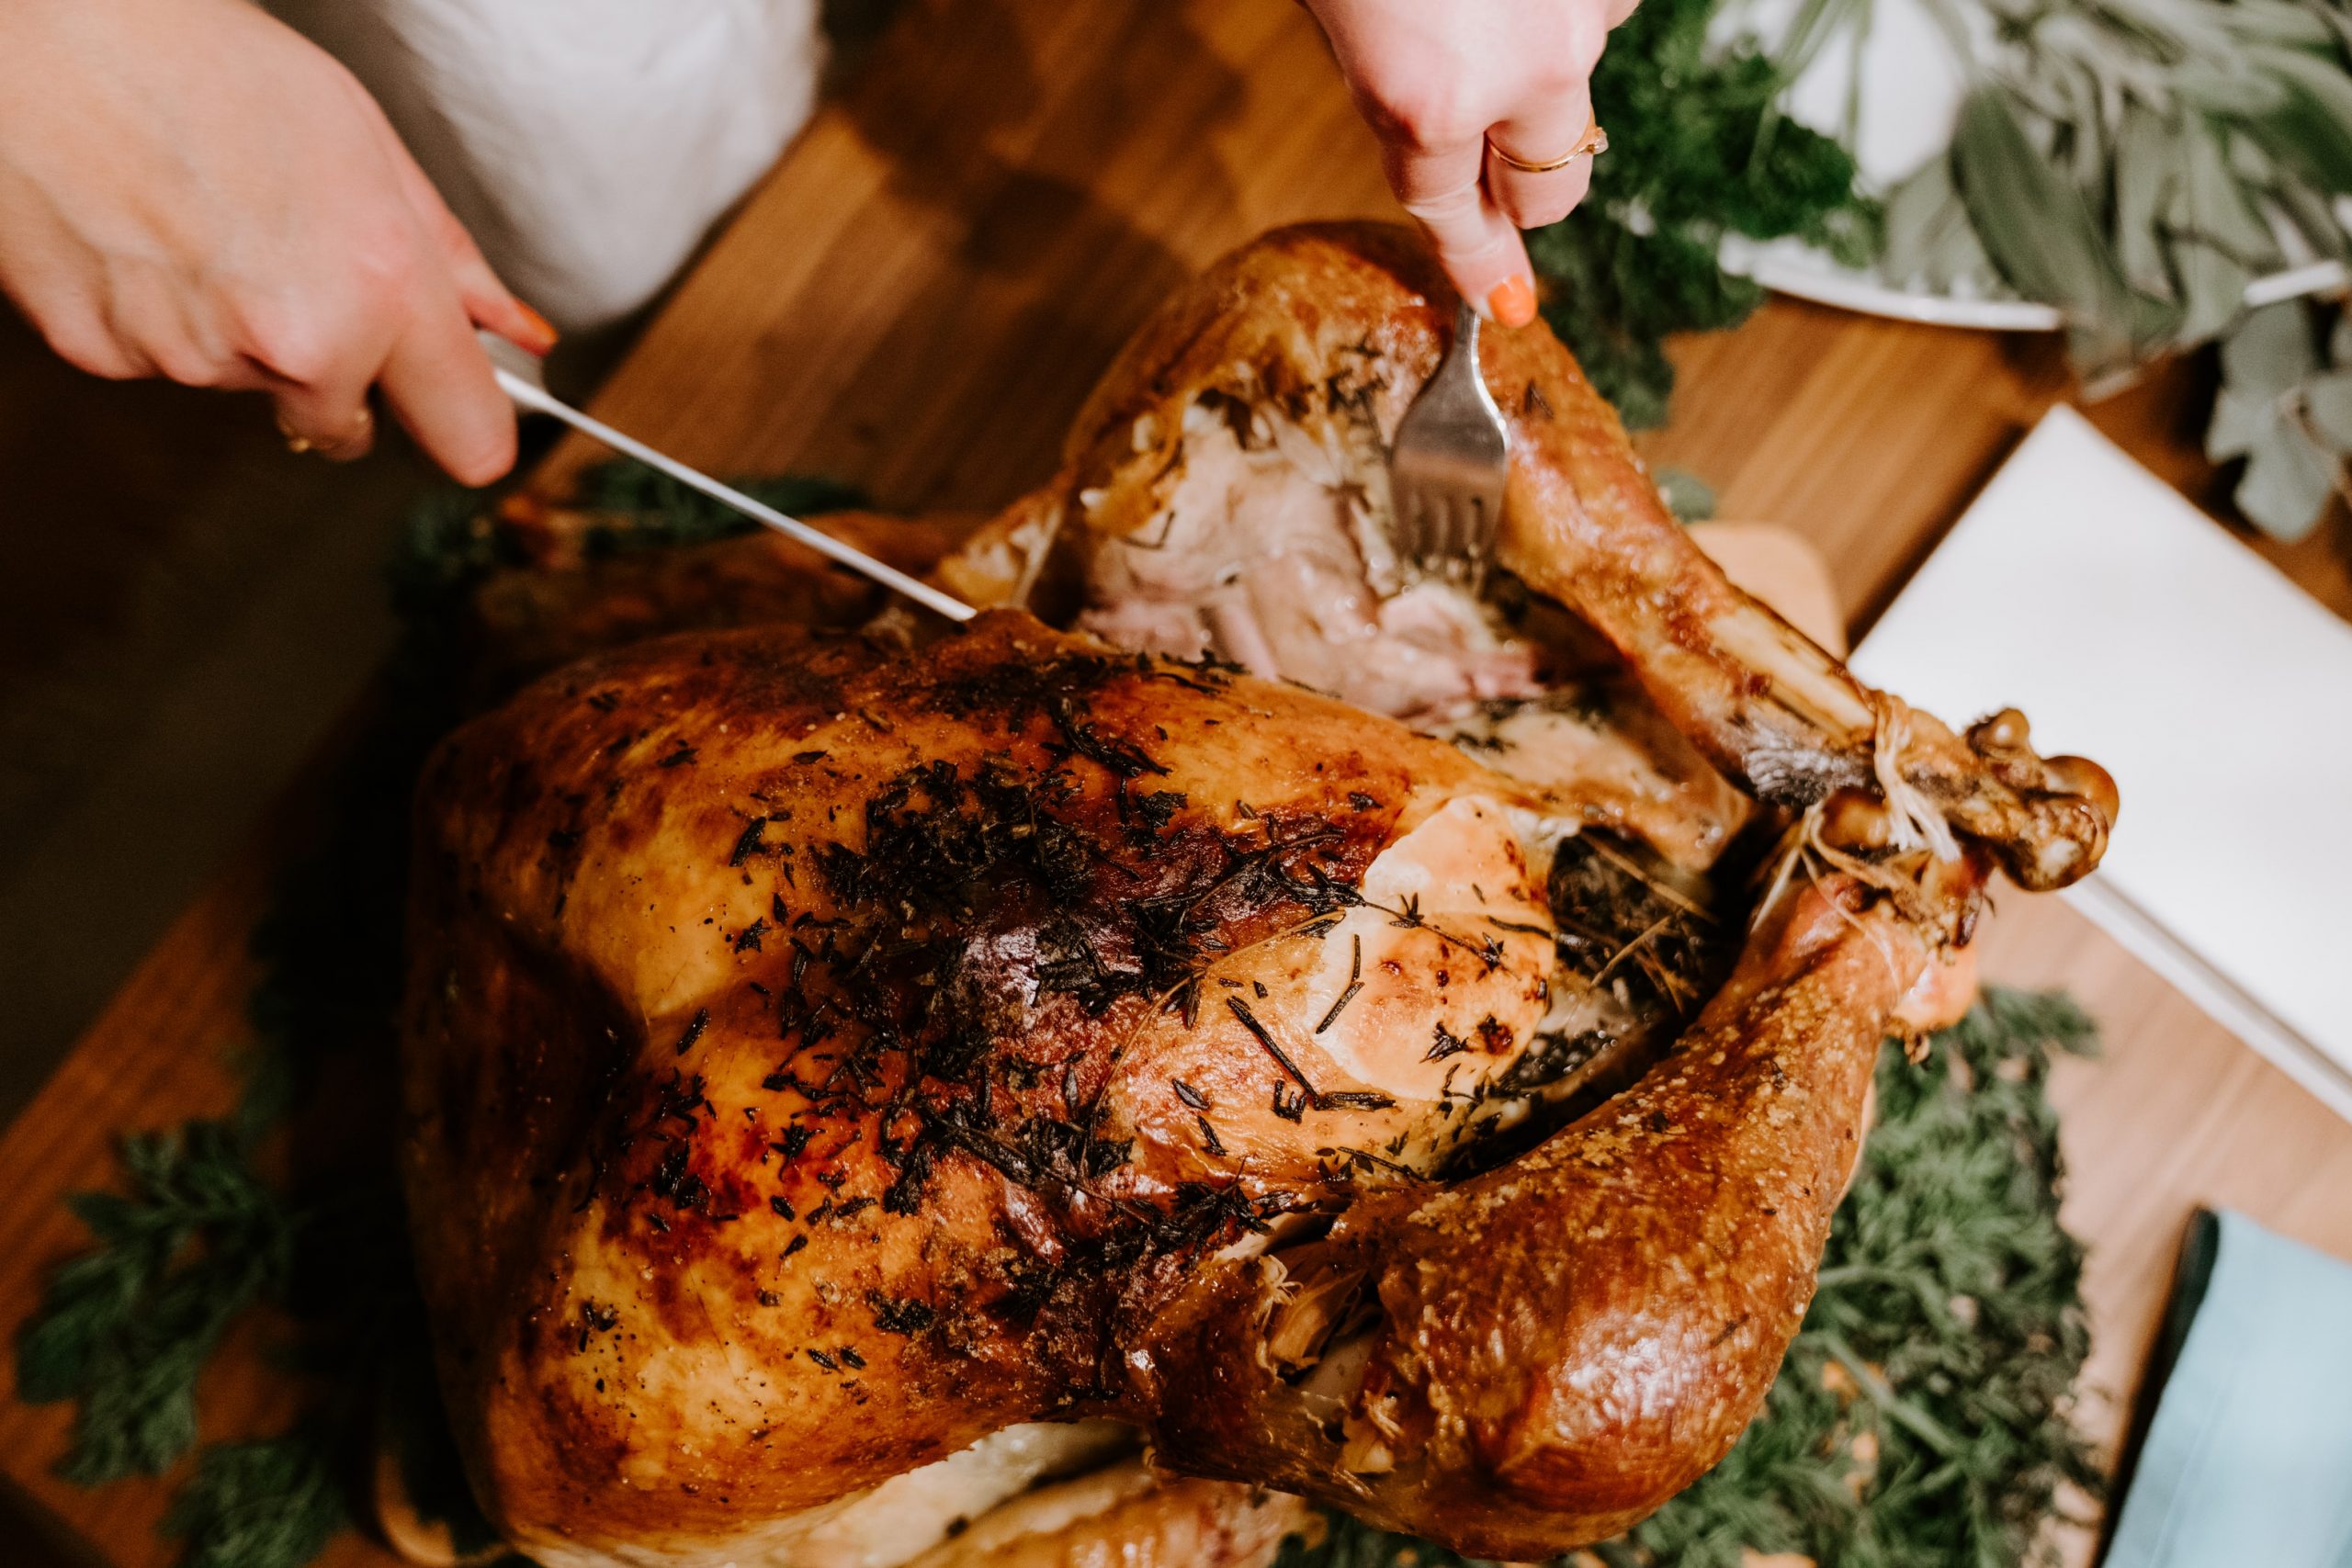 We round up the must have kitchen gadgets for cooking the ultimate roast dinner on or Sunday, or the all the trimmings Christmas dinner!